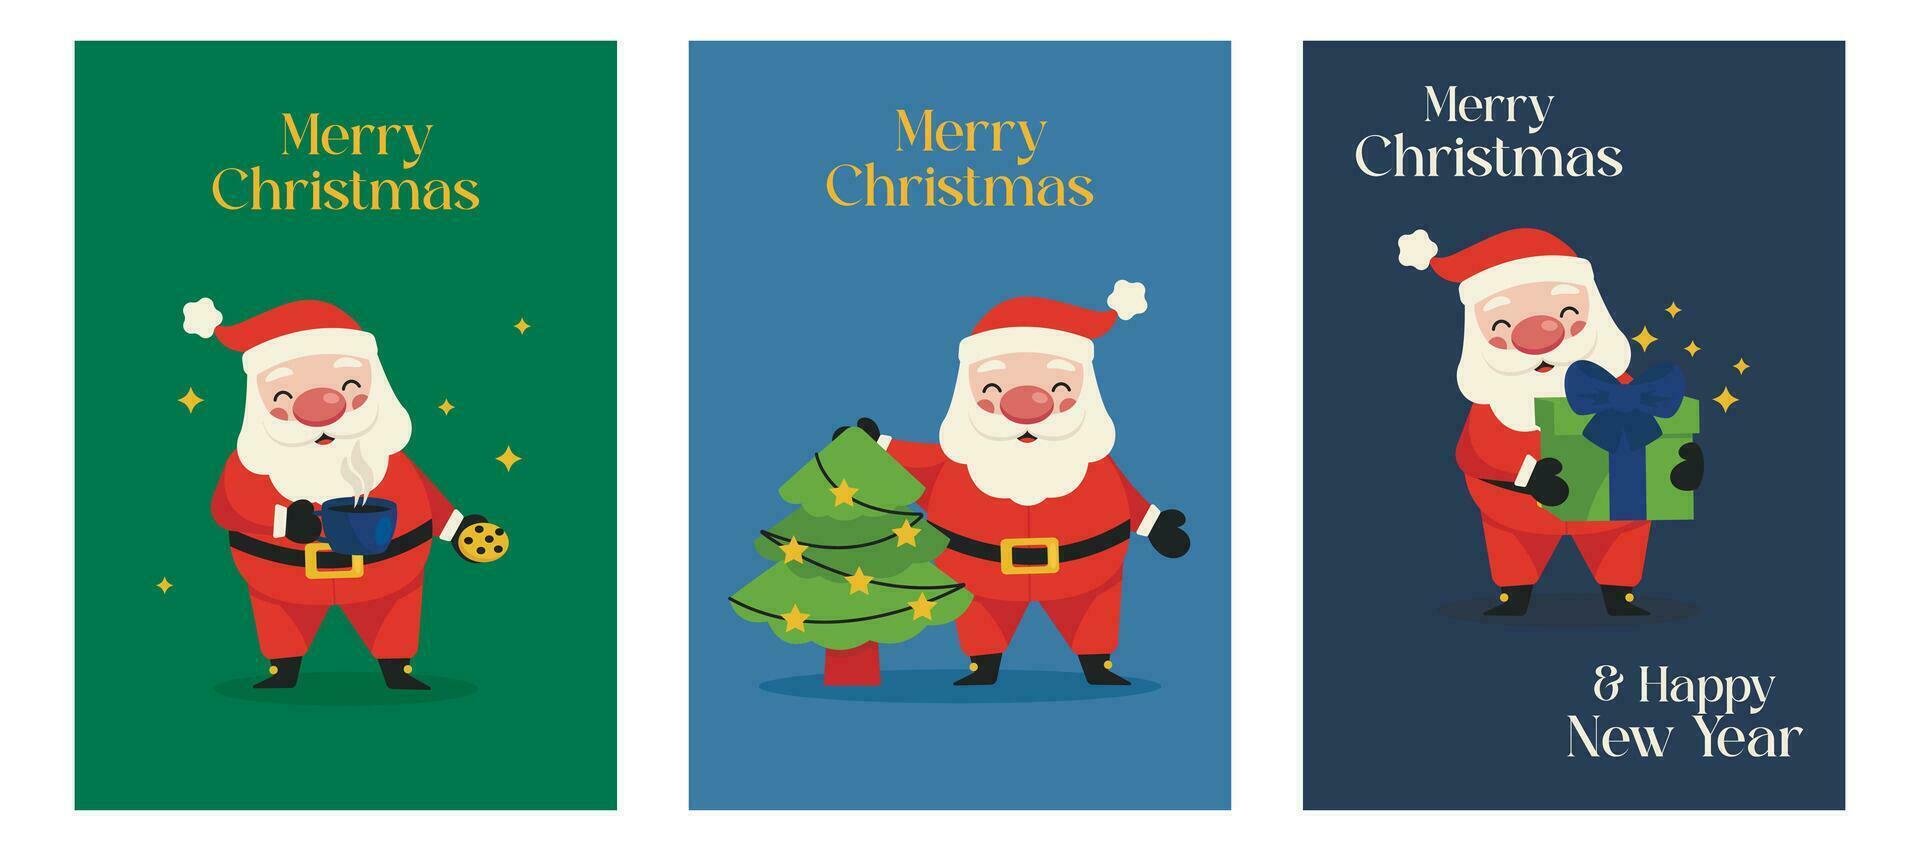 Christmas card set. With illustrations of Santa Claus. Merry Christmas. Vector graphic.